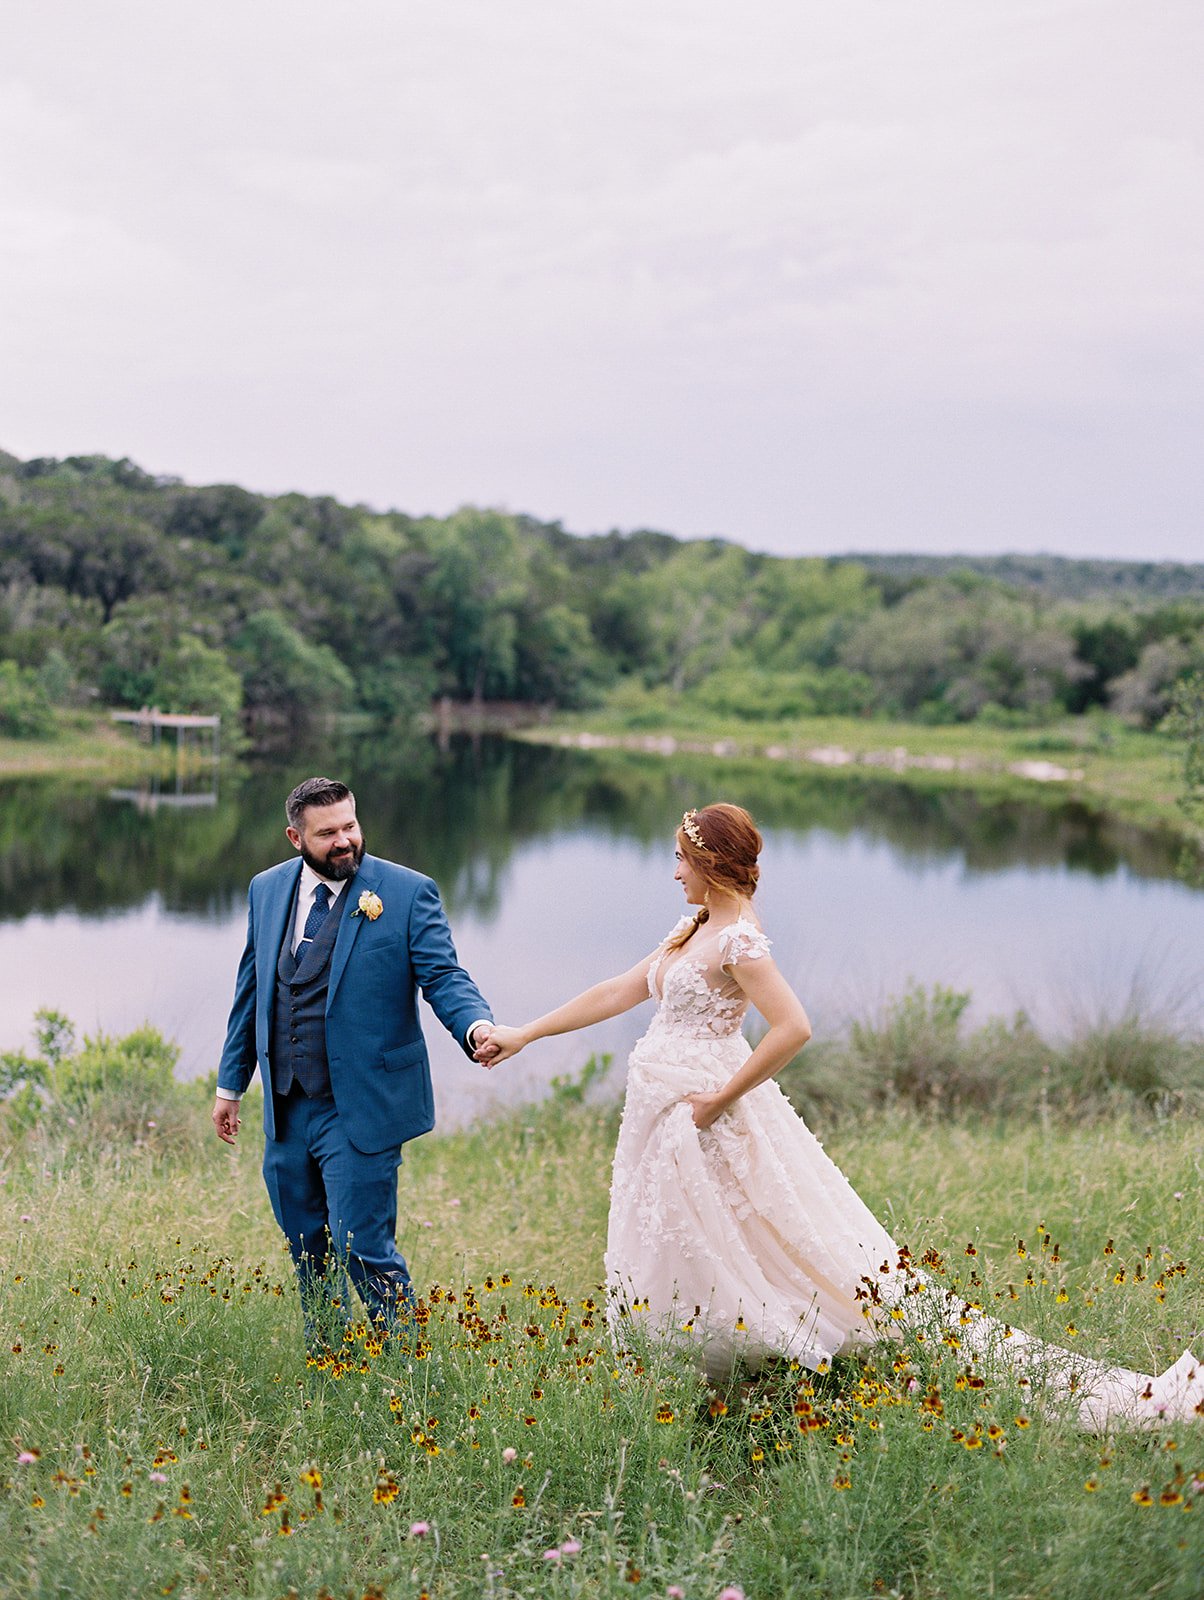 Pink-Champagne-Designs-Texas-Hill-Country-Bride-Inspiration